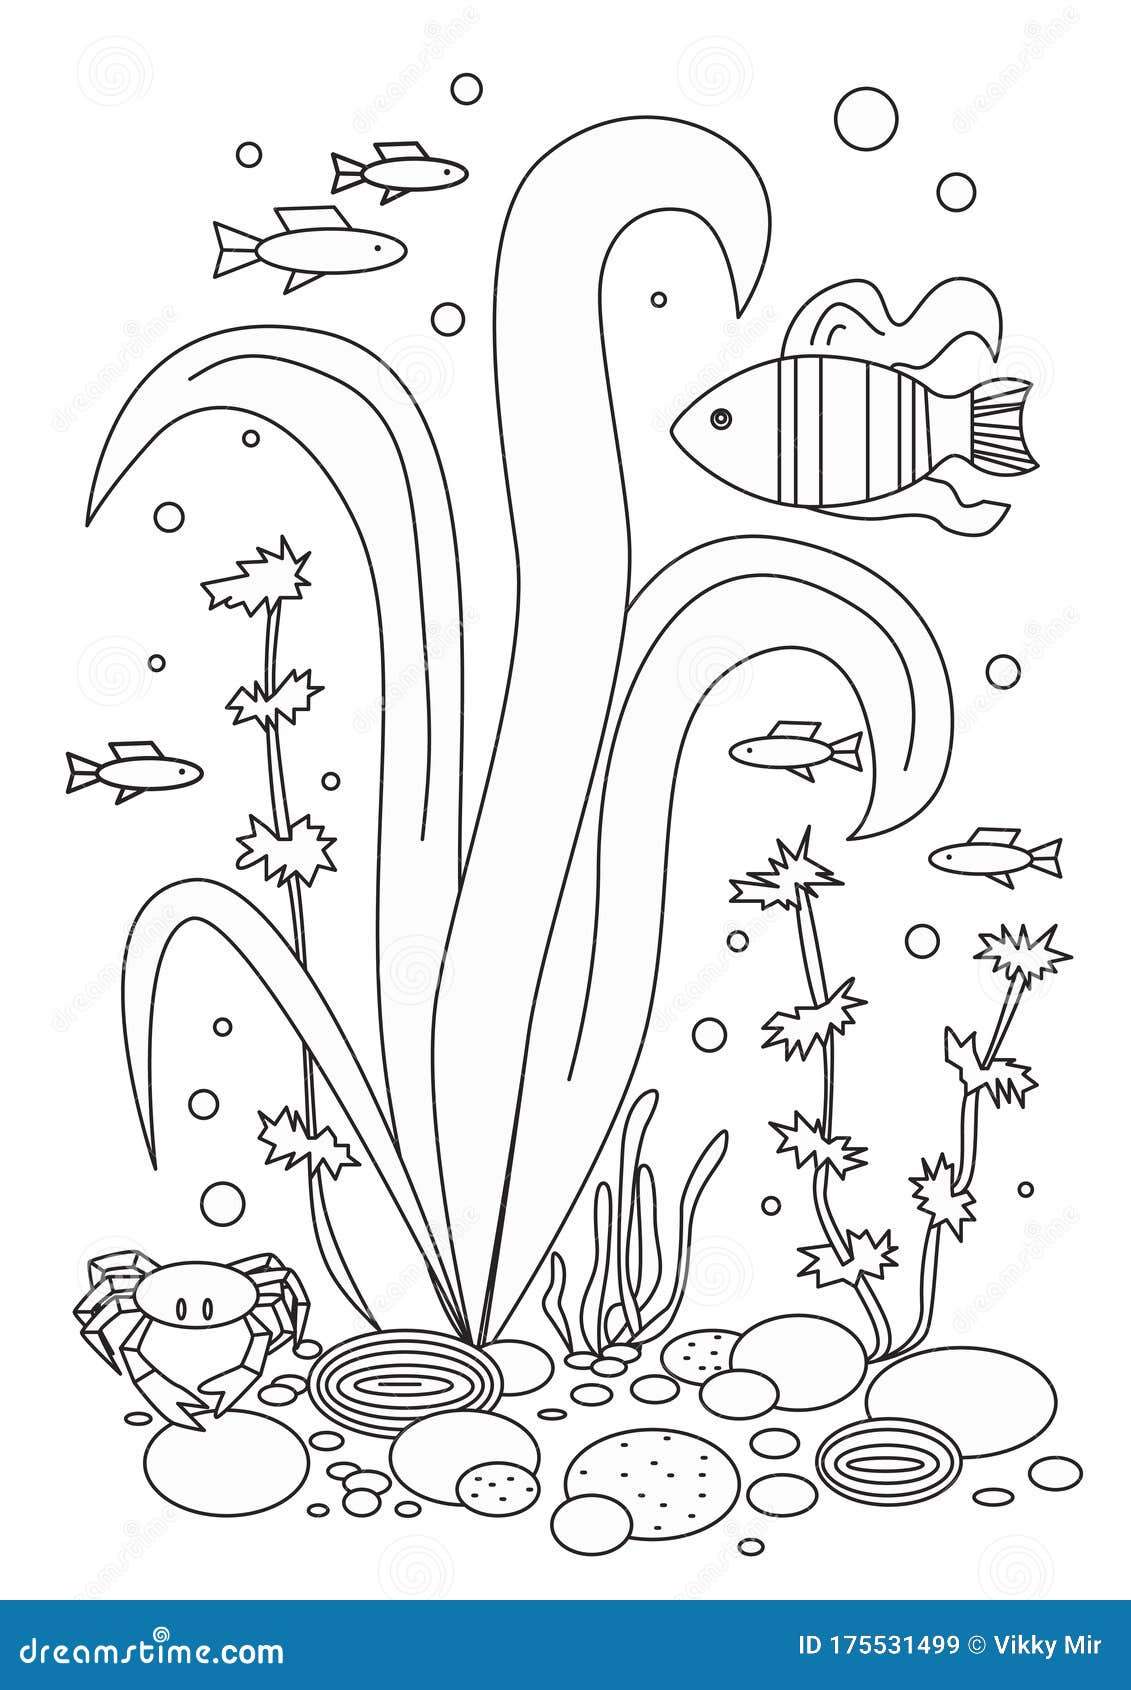 Algae, crab and fish on a white background as a coloring page, outline vector stock illustration with ocean or sea and animal in. Coloring page with seaweed, fish, crab isolated on white background for adults or children. Outline or linear A4 vector stock illustration for coloring and printing